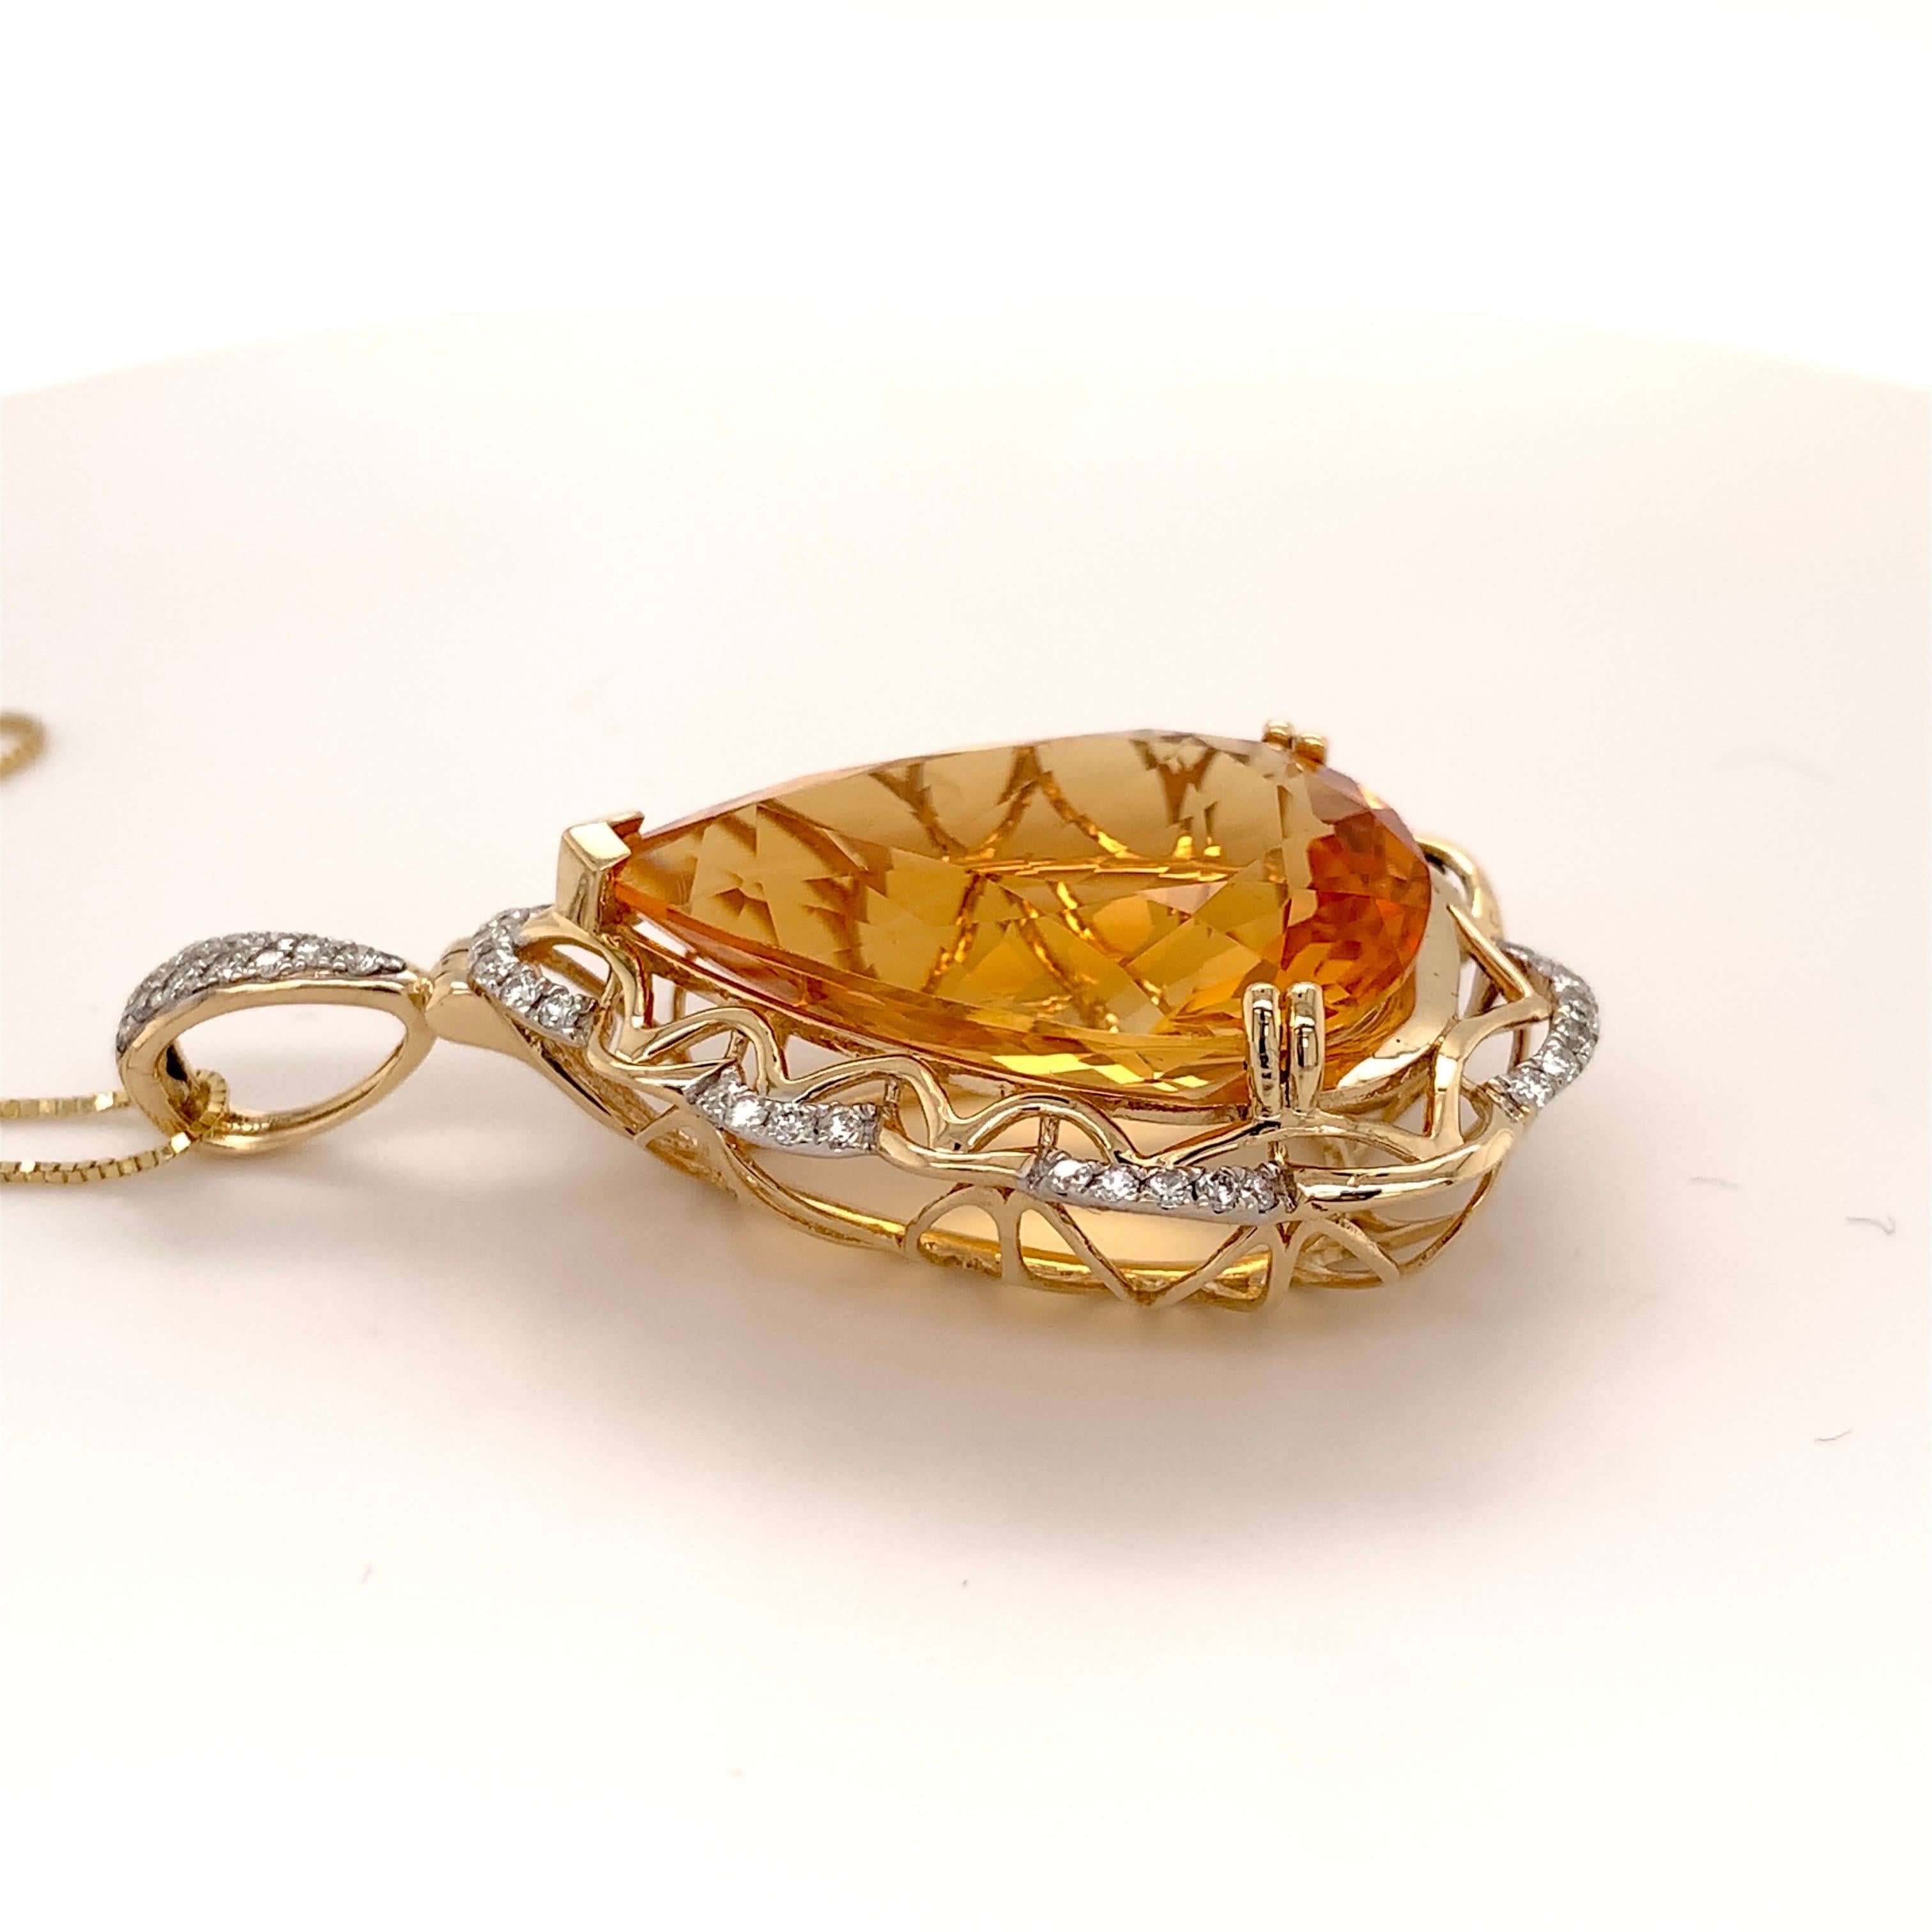 Stunning citrine diamond pendant. High brilliance, golden honey tone, transparent clean, pear shape faceted, natural 21.84 carats citrine mounted on high profile open basket with 4 bead prongs and knife prong, accented with round brilliant cut